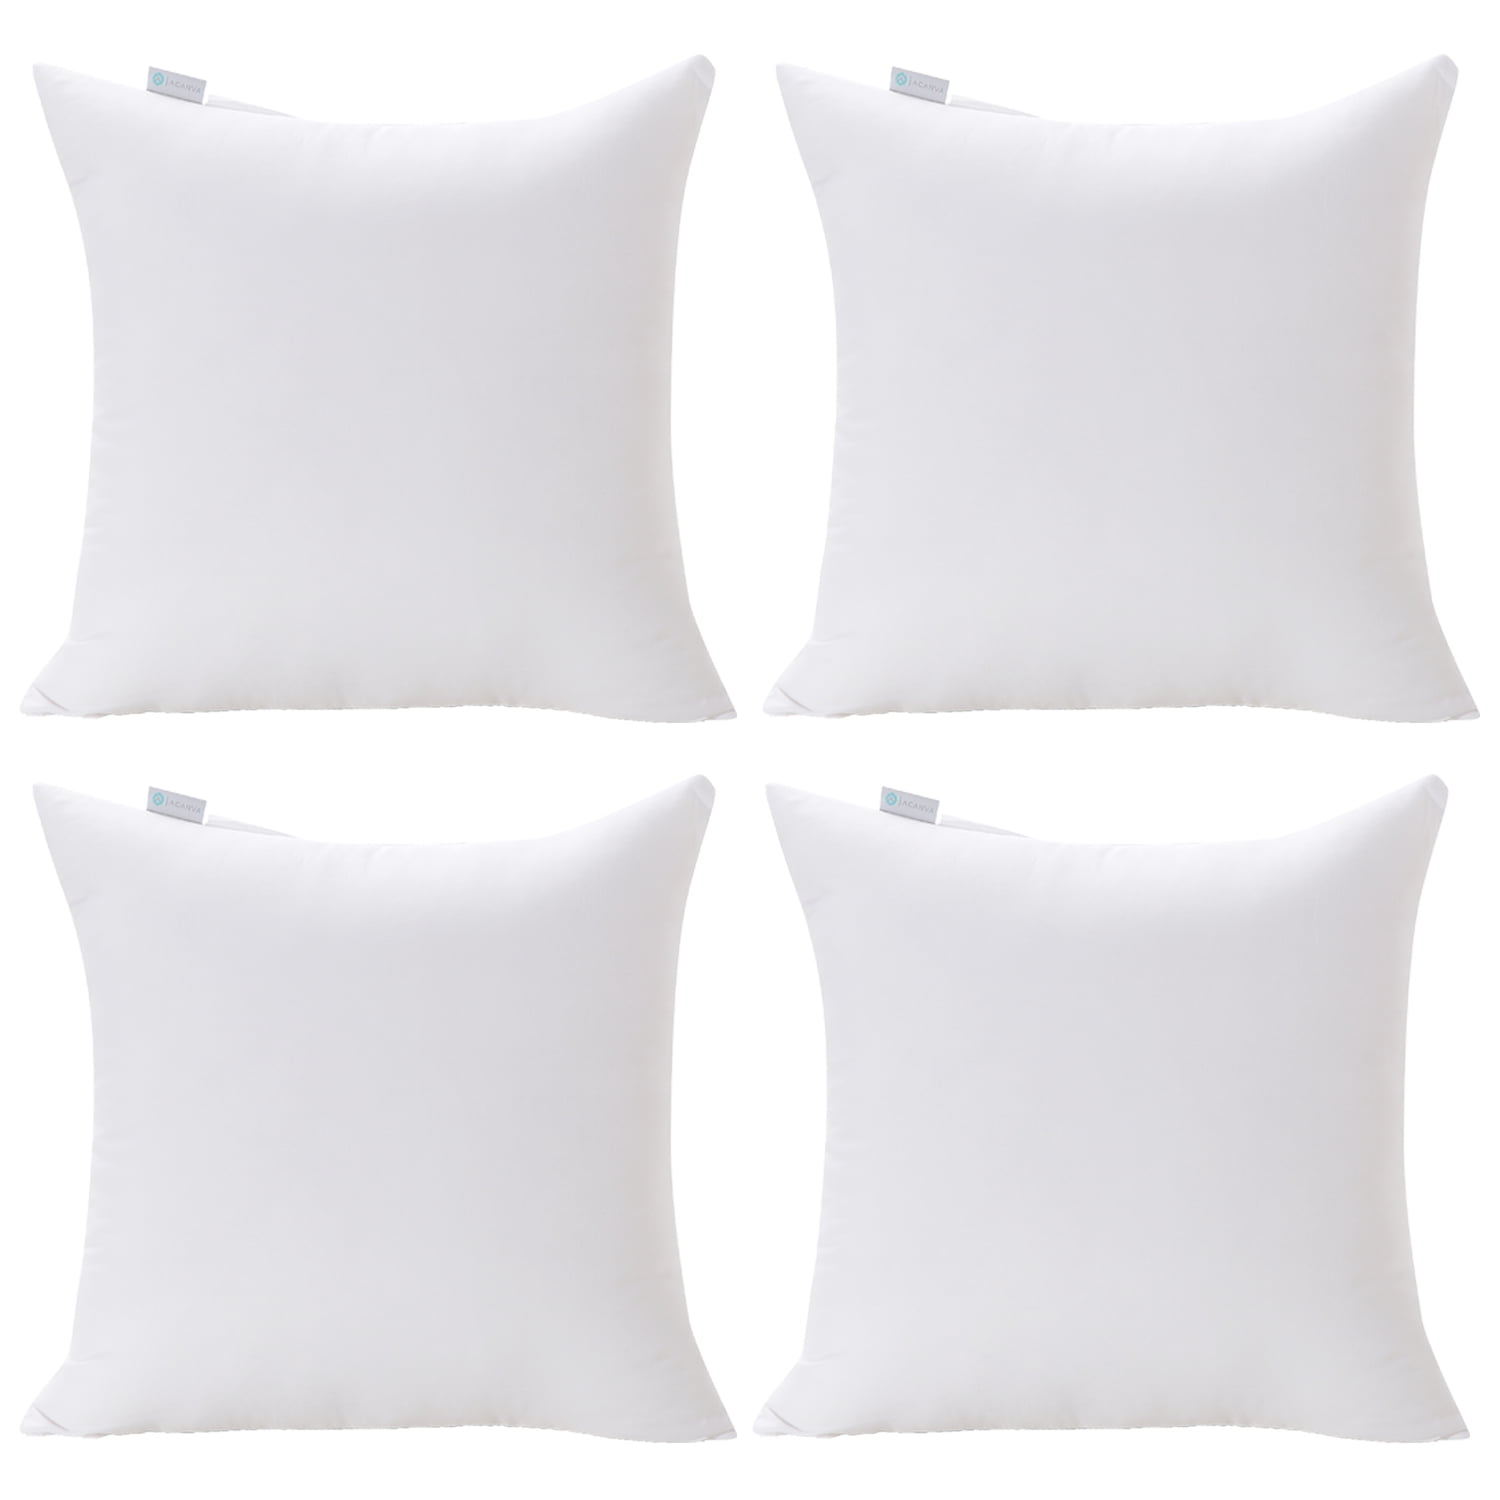 sham Stuffer for Sofa Throw 10 x 10 Inches MoonRest Premium Square White Pillow Insert Form with Hypoallergenic Polyester Fiber Filling